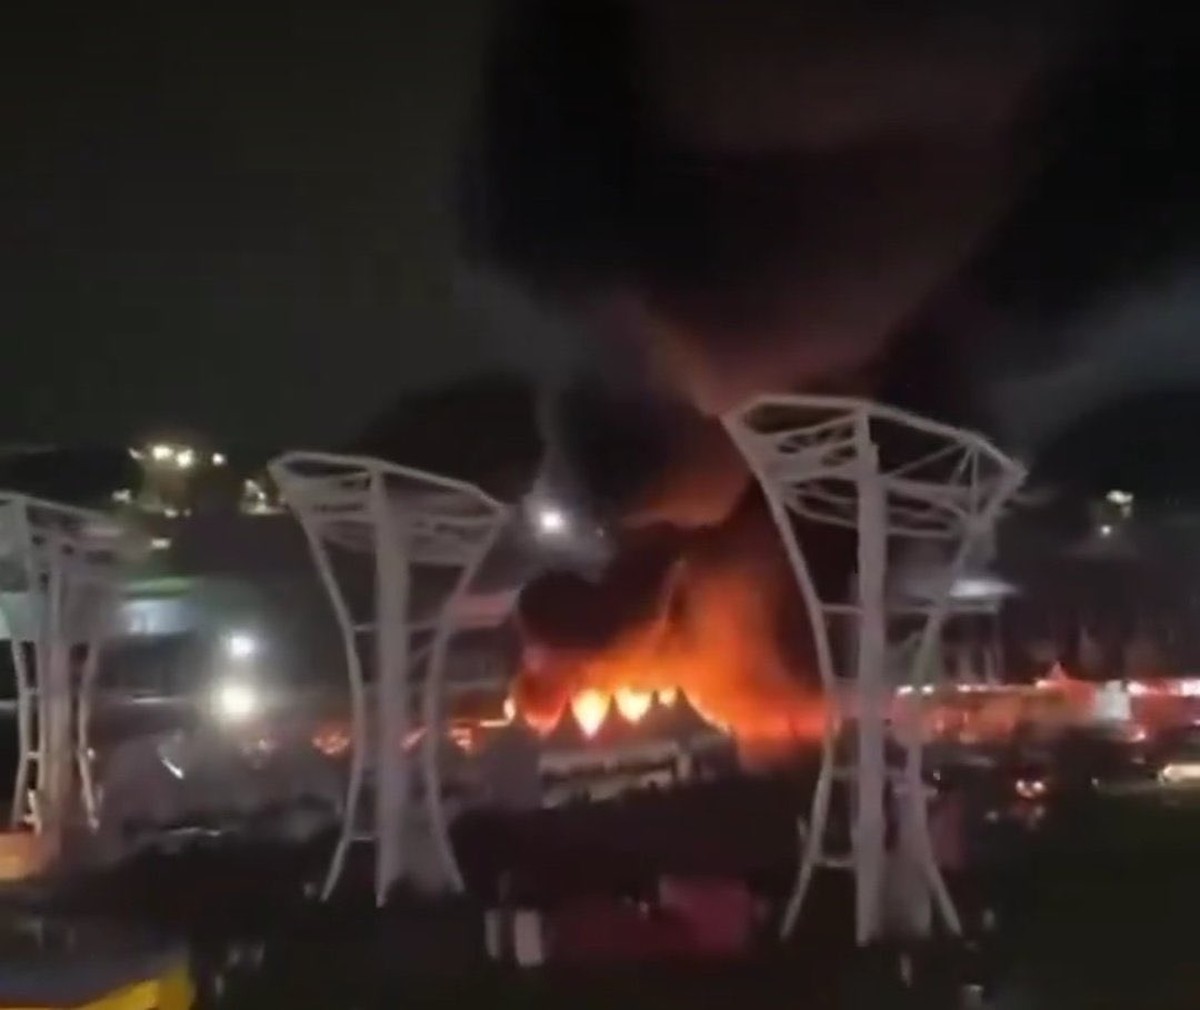 Fire hits Lollapalooza support tent